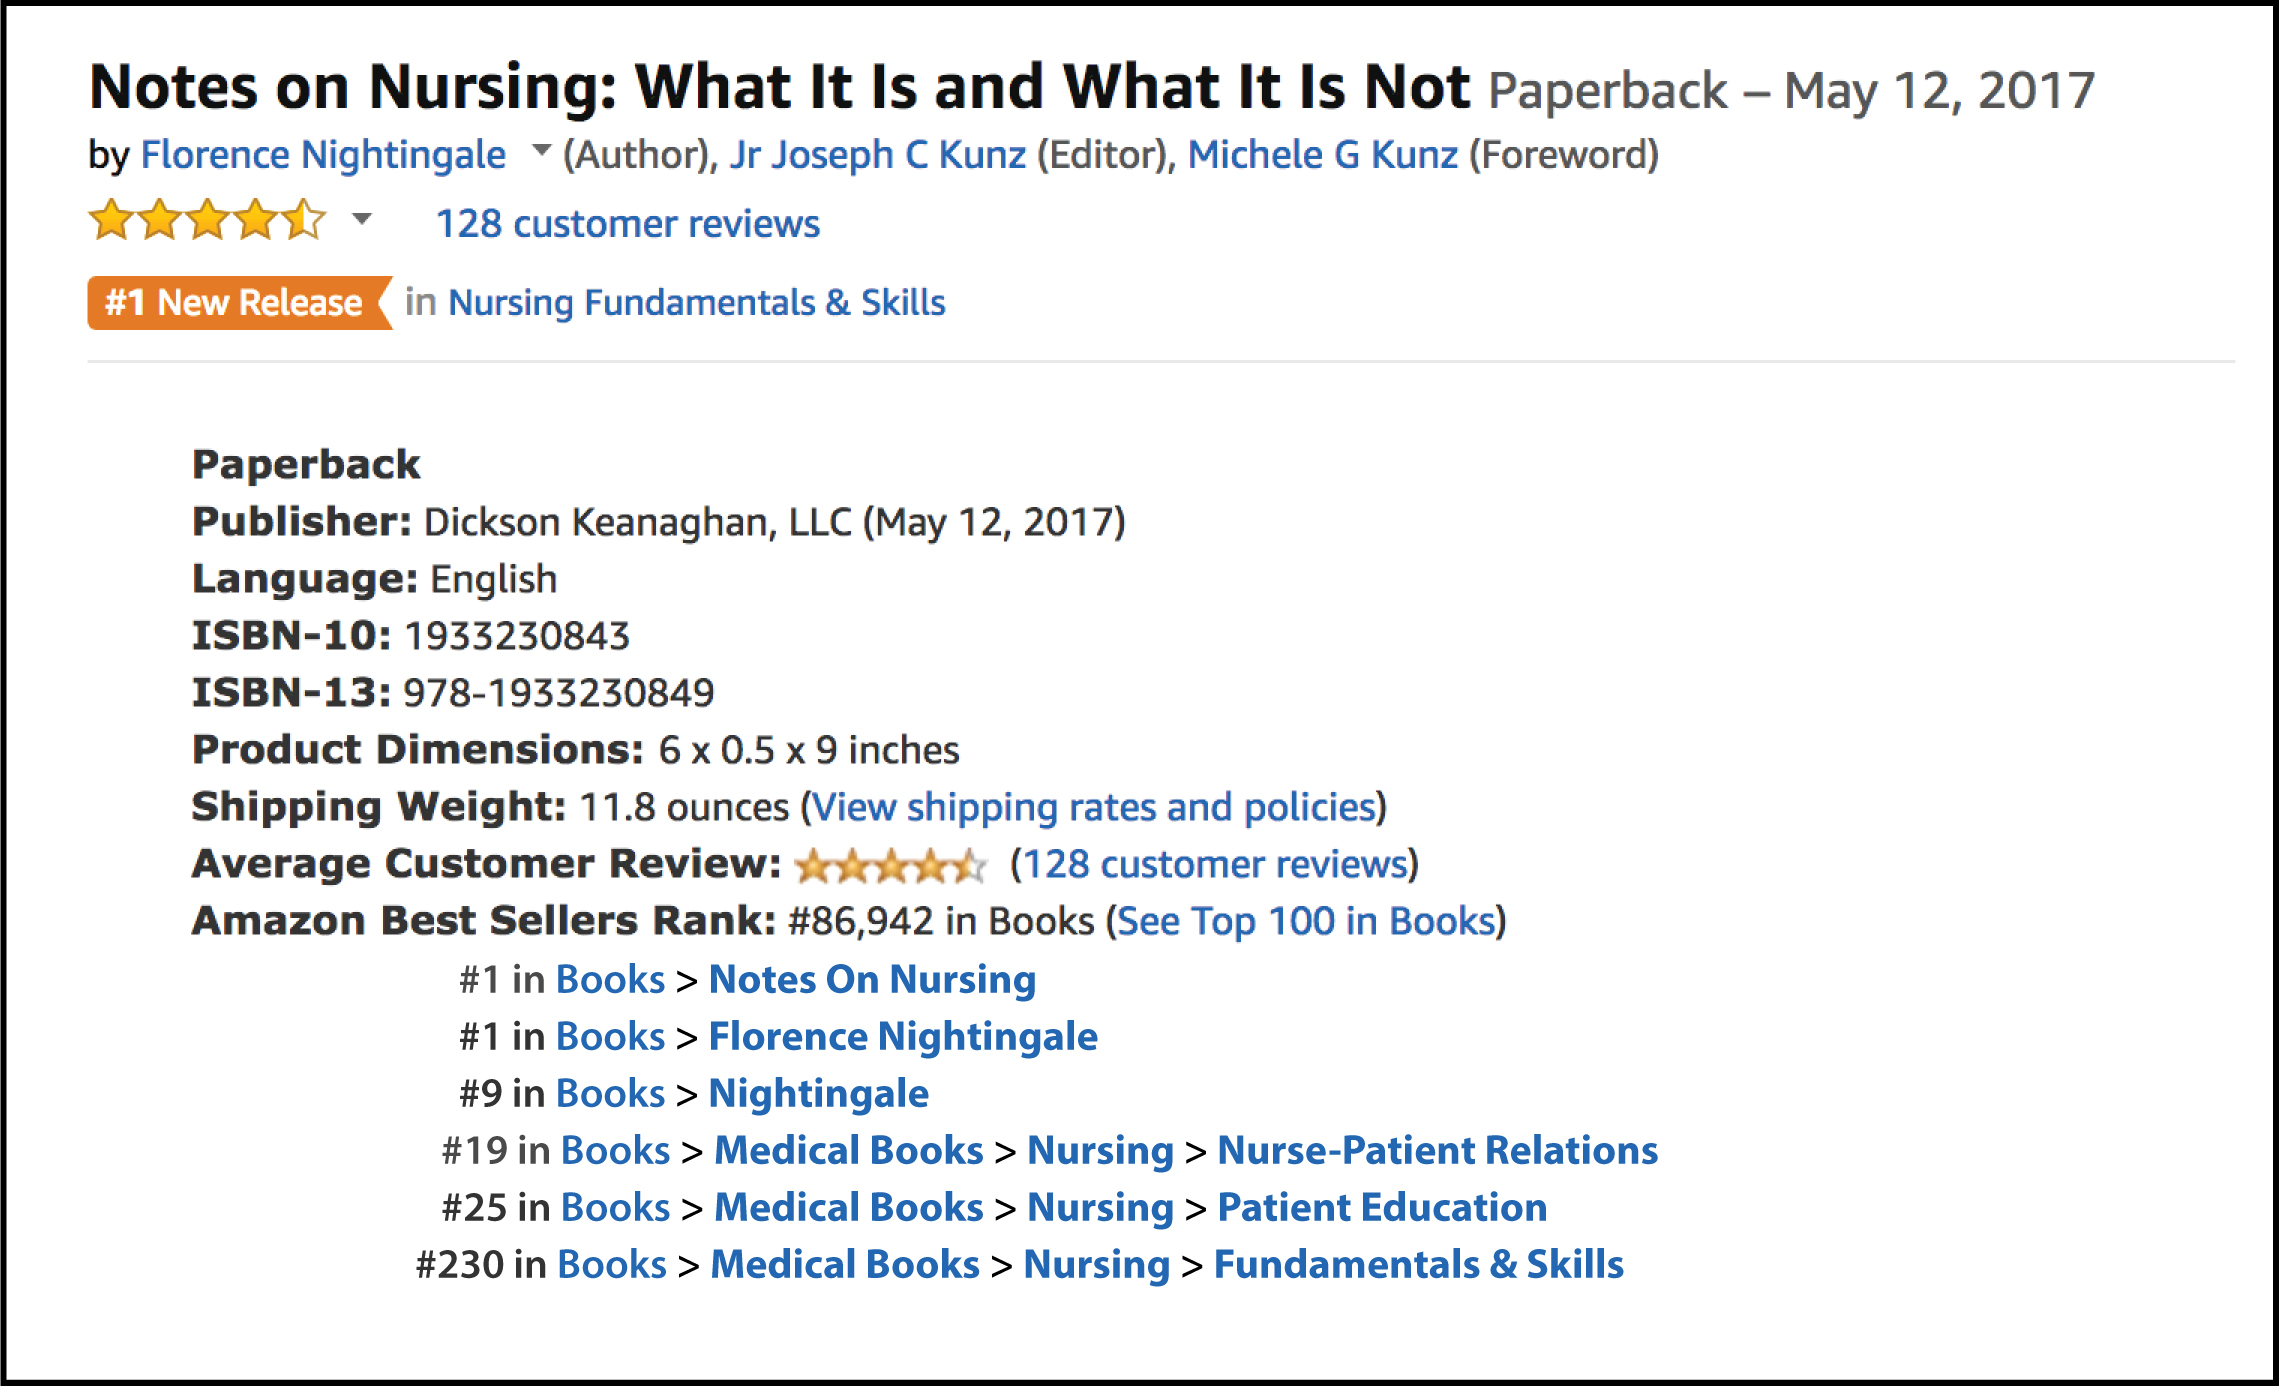 Amazon Product Details and Best Seller Rank for "Notes On Nursing"